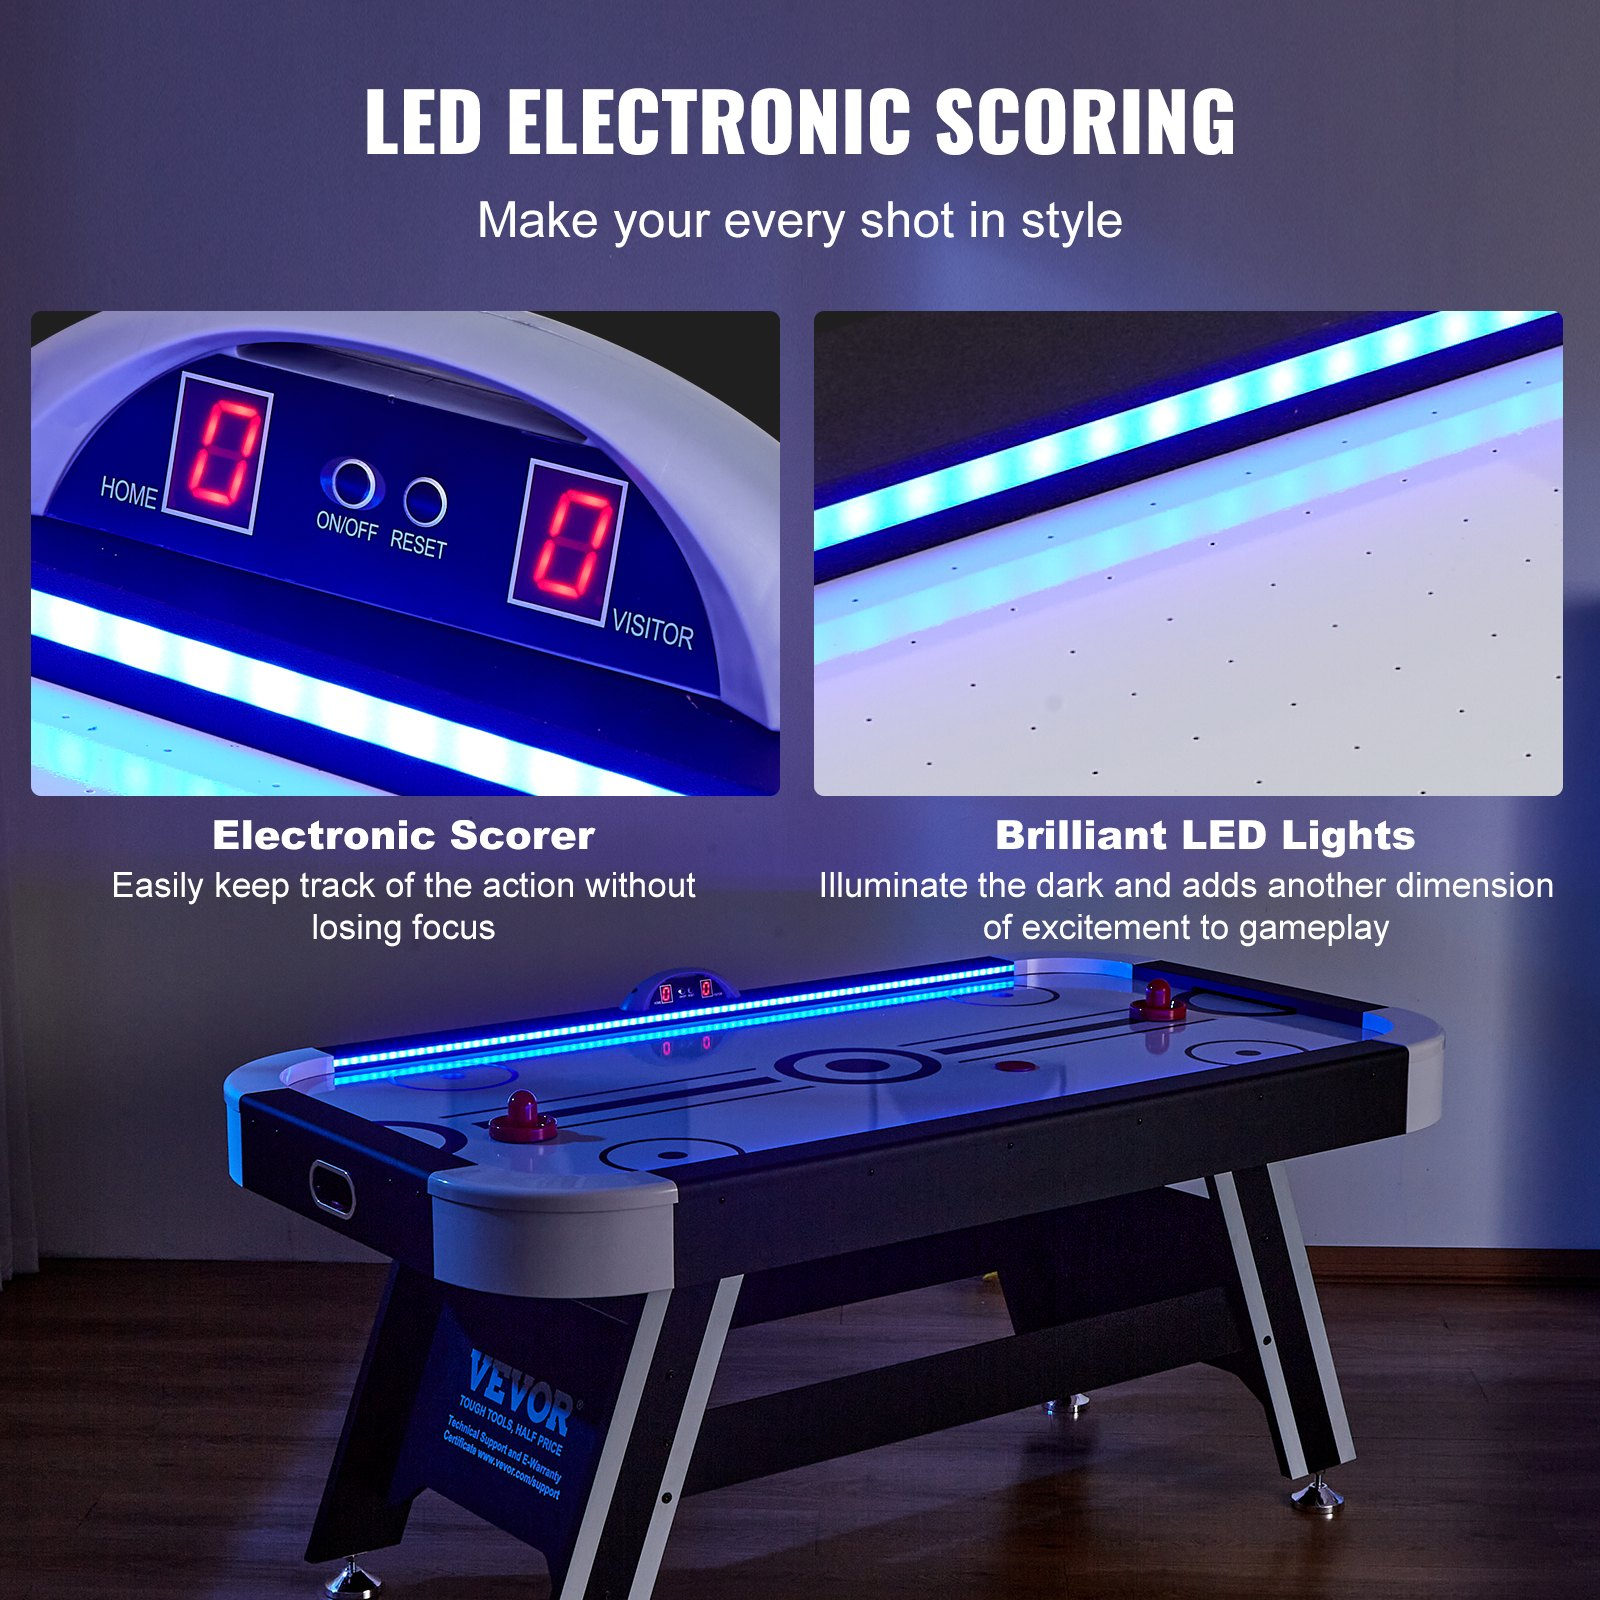 VEVOR Air-Powered Hockey Table, 72" Indoor Hockey Table for Kids and Adults, LED Sports Hockey Game with 2 Pucks, 2 Pushers, and Electronic Score System, Arcade Gaming Set for Game Room Family Home, Goodies N Stuff